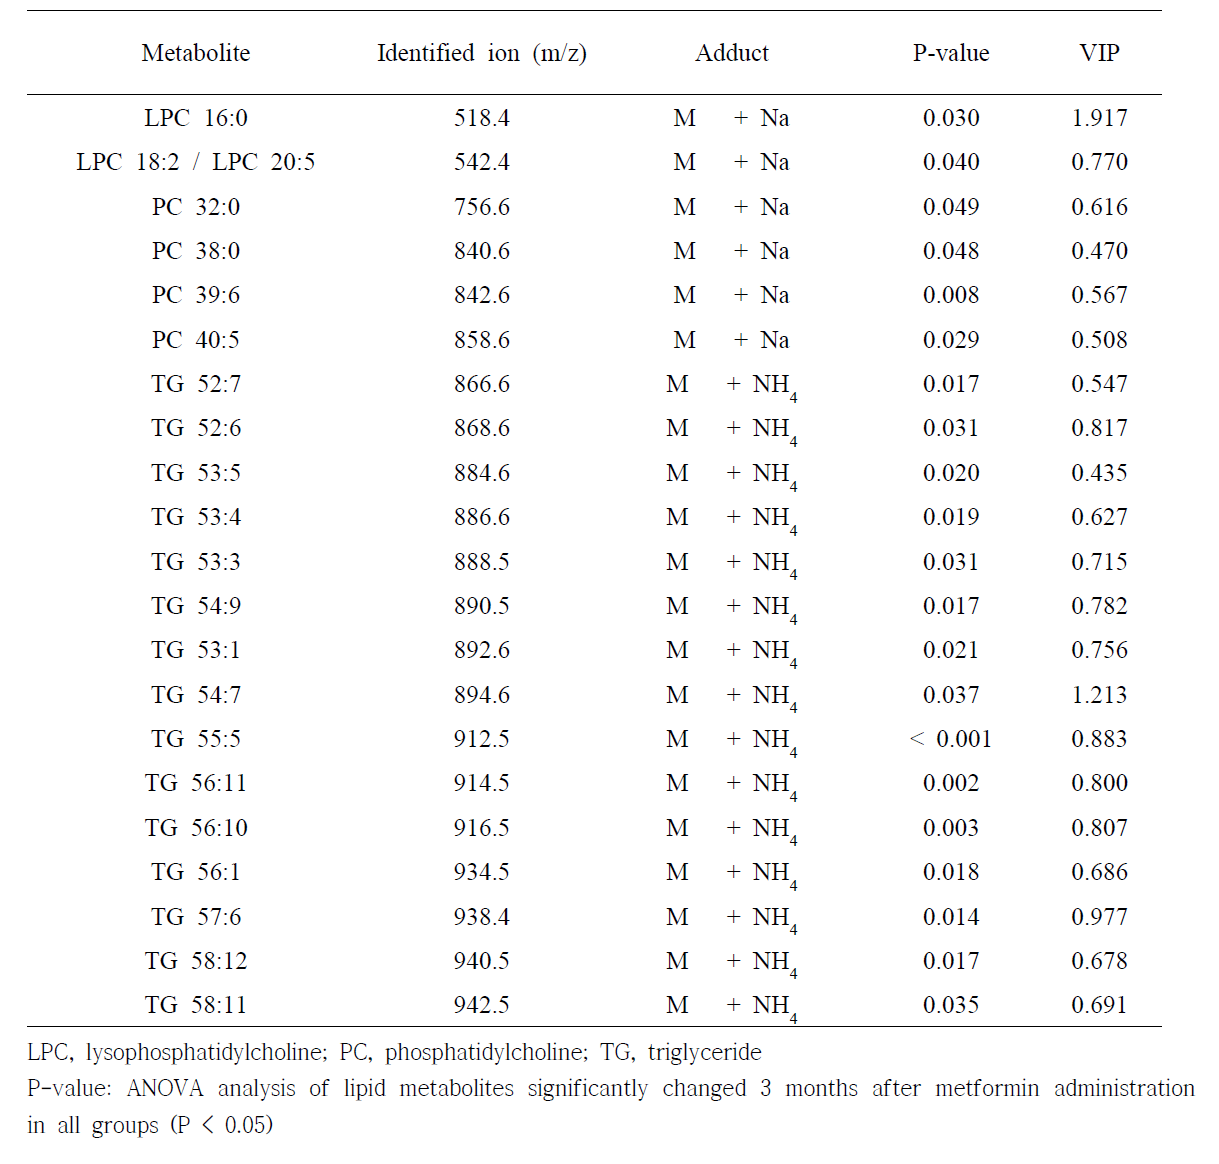 Identified lipid metabolites that significant differences baseline and after 3 months metformin administration.